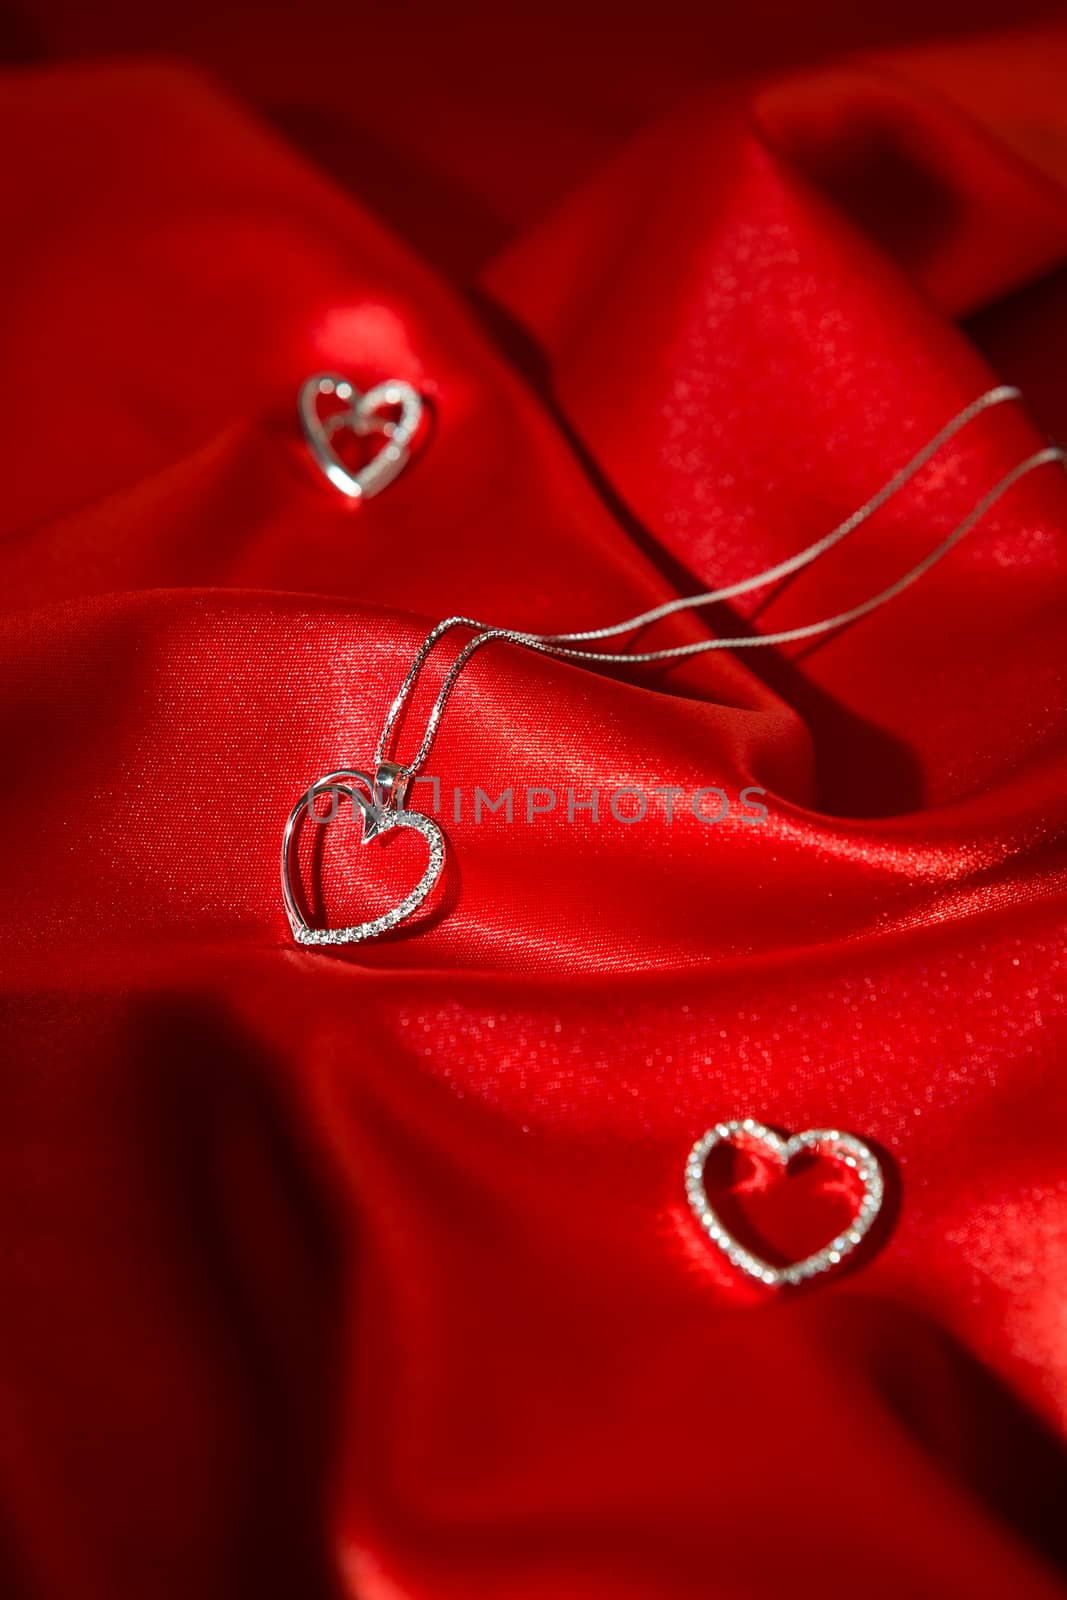 Silver heart pendants over a red satin background